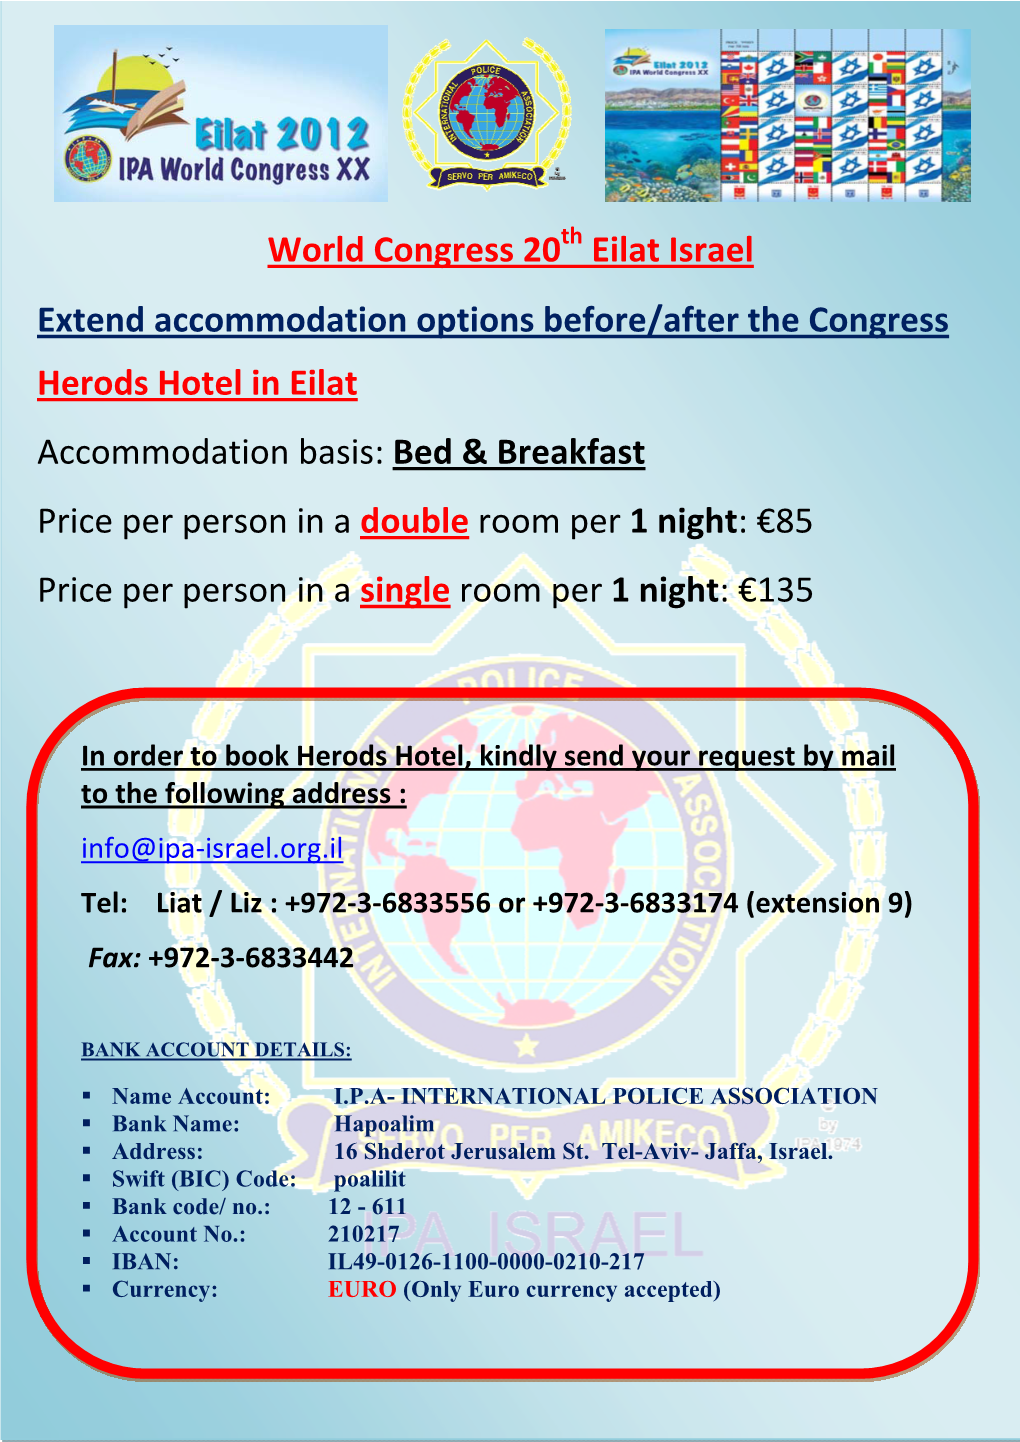 Eilat Israel Extend Accommodation Options Before/After the Congress